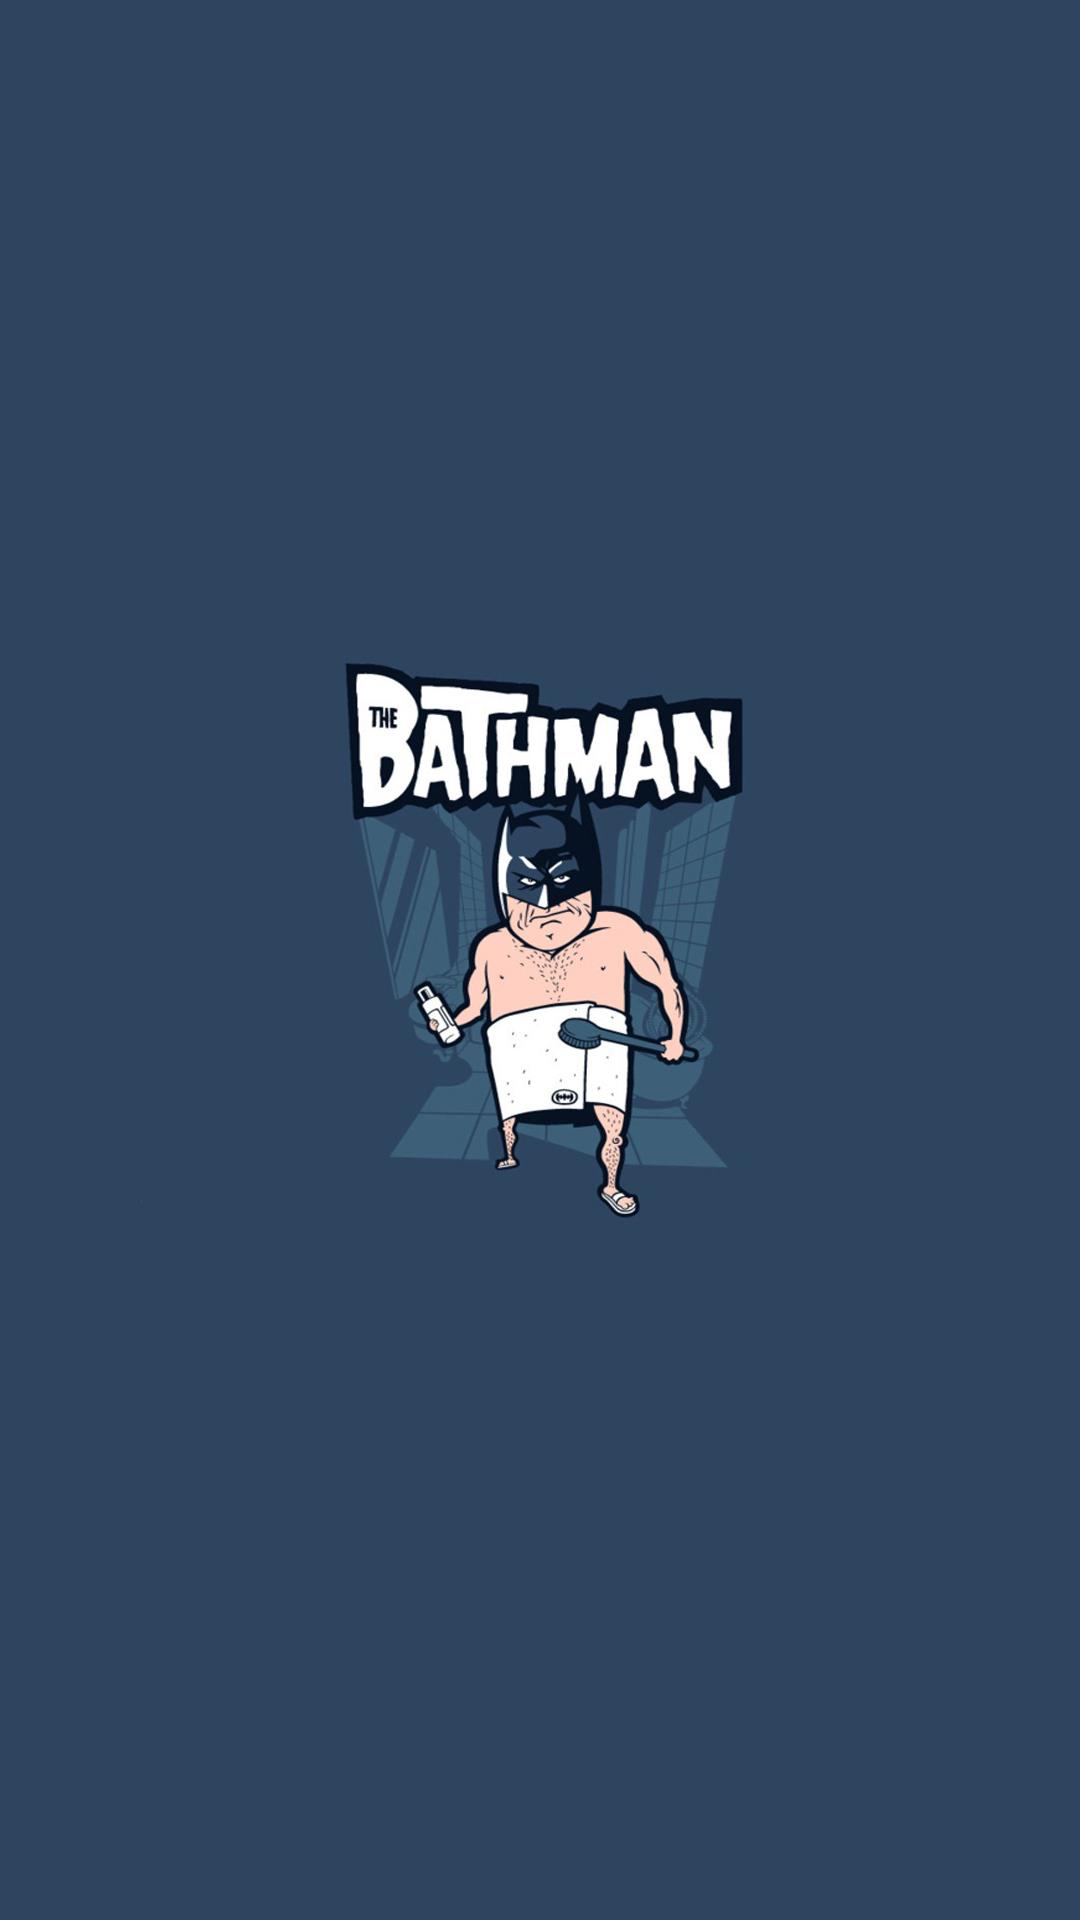 The Bathman Funny Android Wallpaper free download